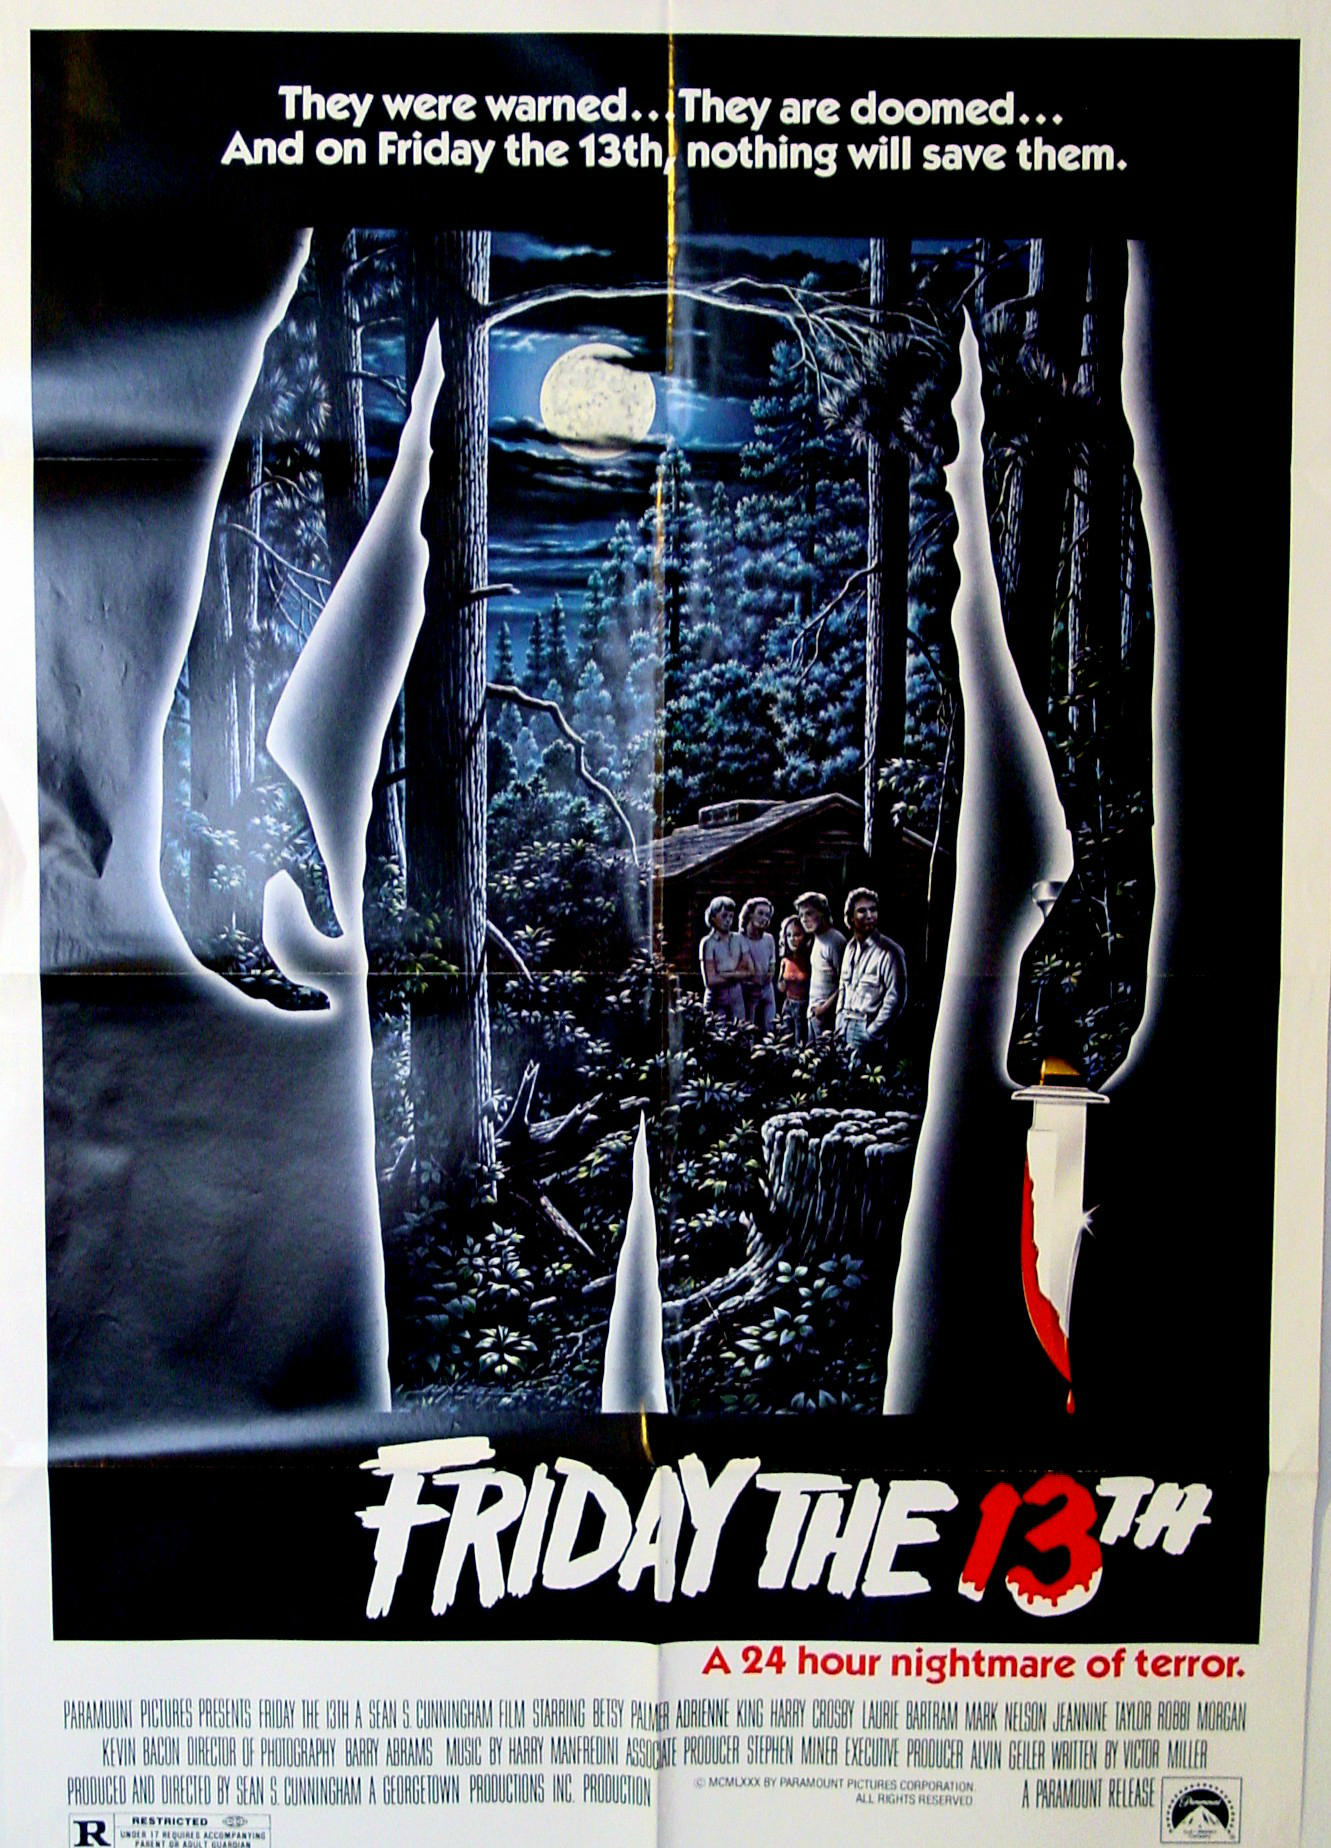 Friday the 13th (1980) (Film) - TV Tropes